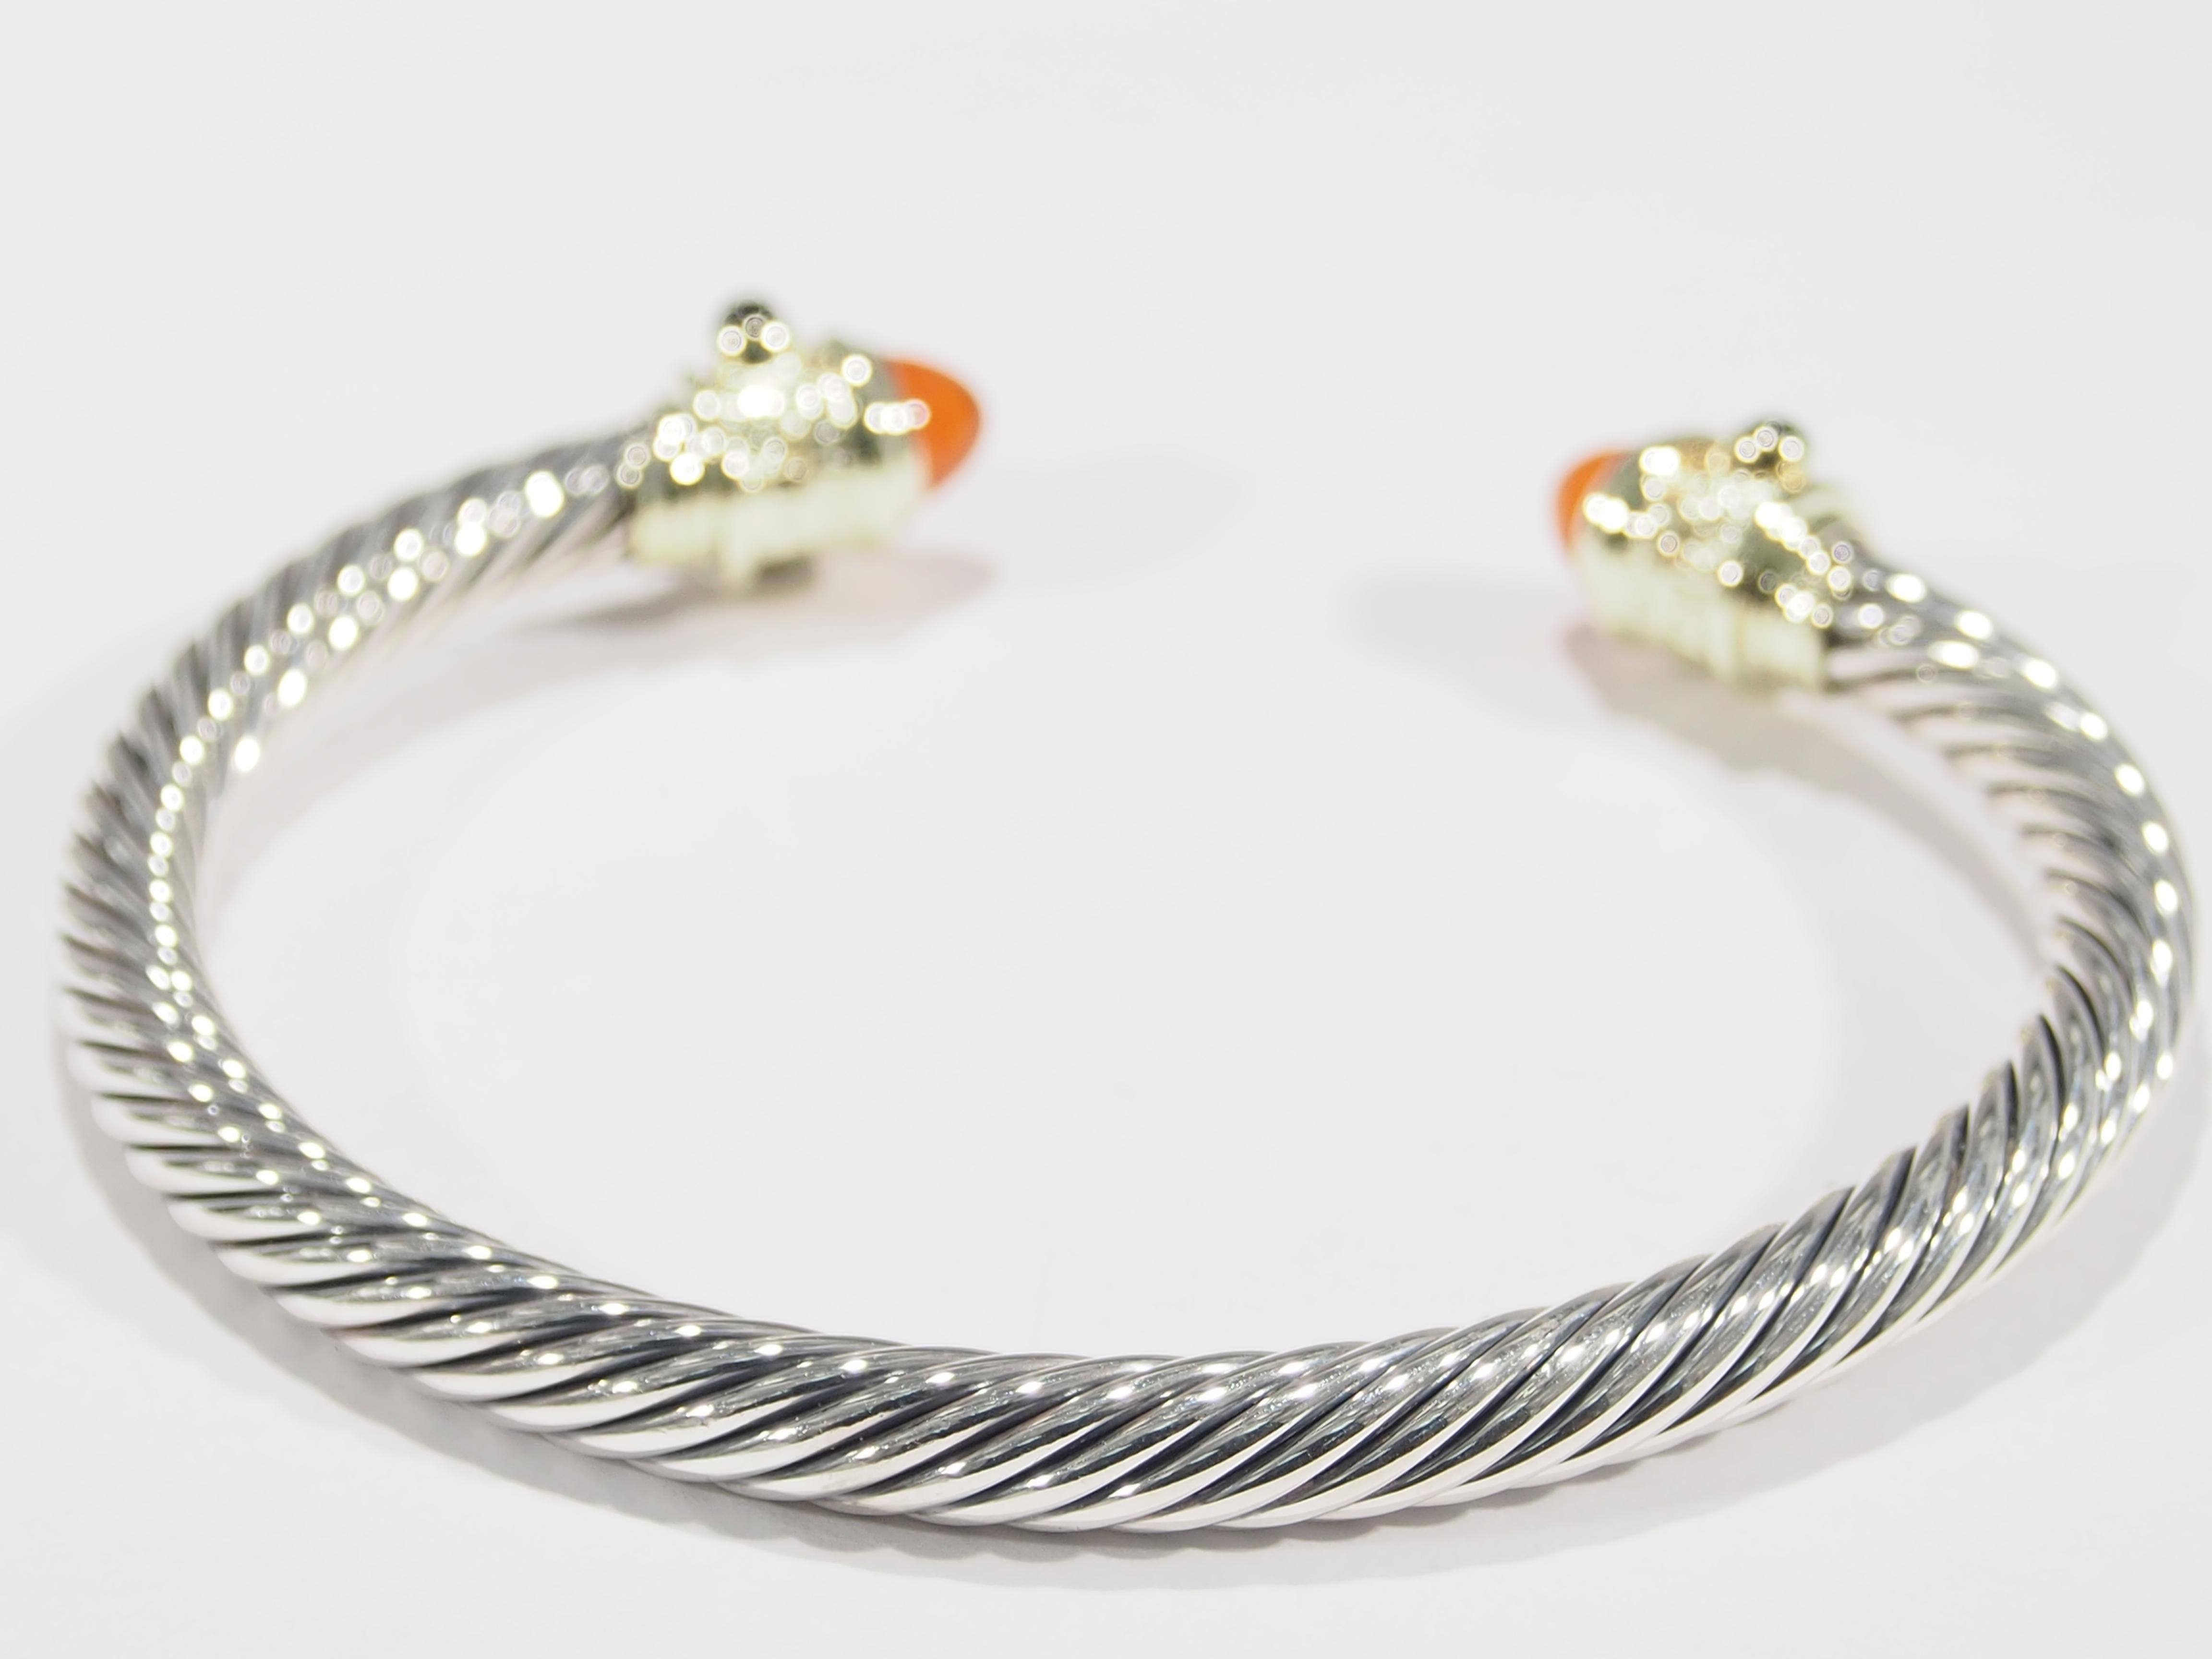 This bangle is classic David Yurman bangle from the Cable Classic Collection. The 14k and SIlver bangle is set with Citrine Cabachon Cut and Onyx stones. It measure approximately 6 inches on the inside and weighs 6.06 grams. A delightful and classic